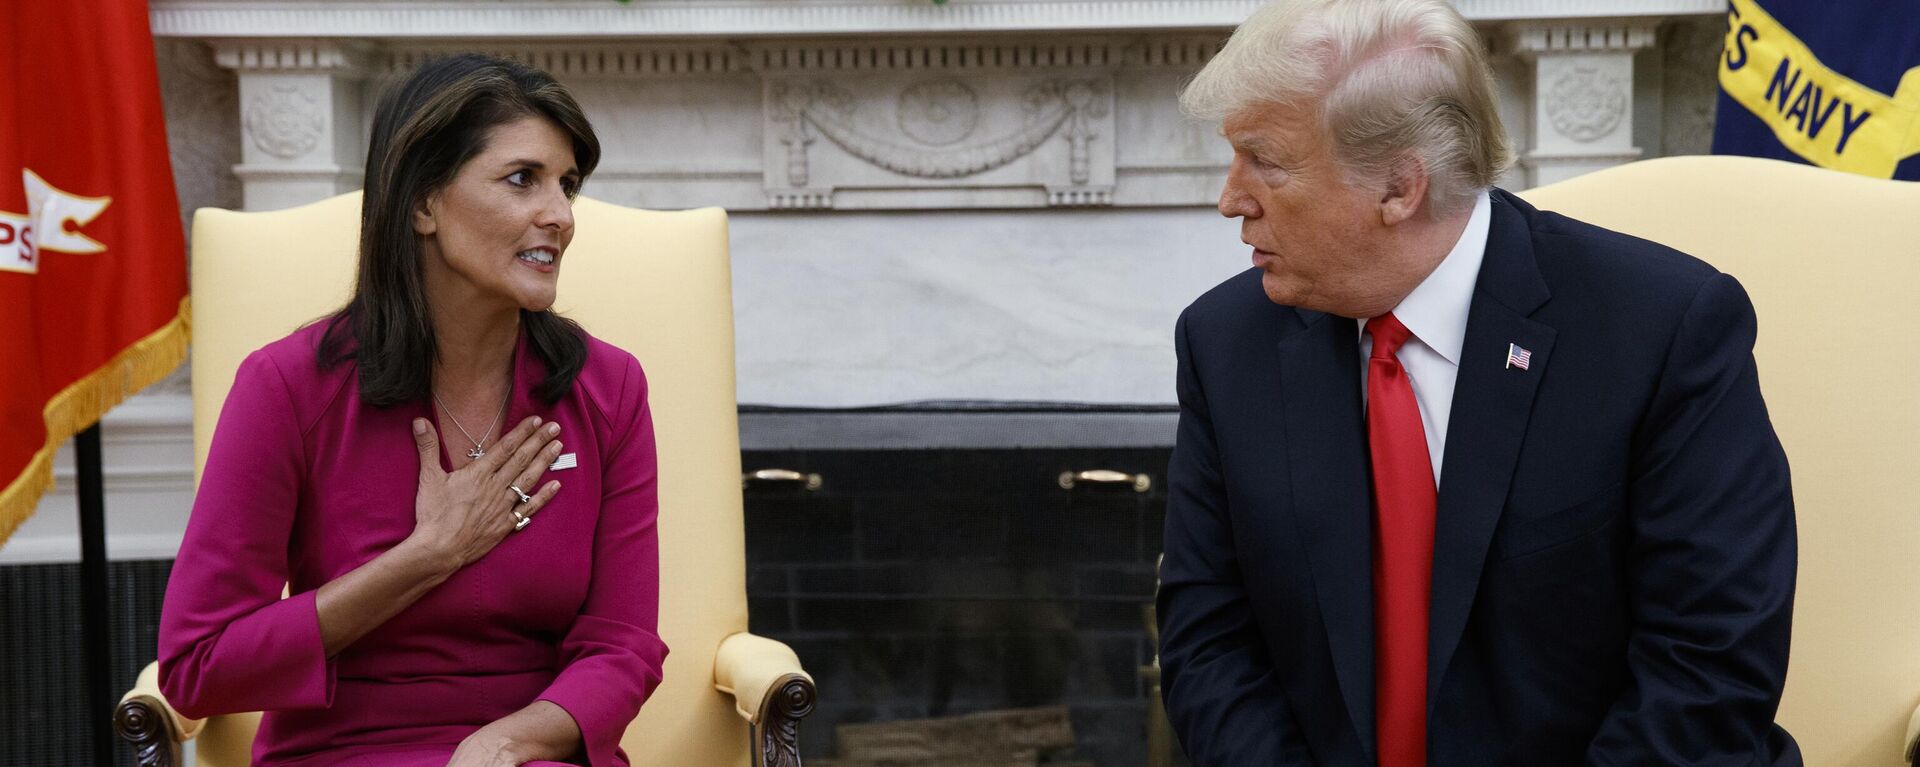 President Donald Trump meets with outgoing U.S. Ambassador to the United Nations Nikki Haley in the Oval Office of the White House, Tuesday, Oct. 9, 2018, in Washington. - Sputnik International, 1920, 12.01.2024